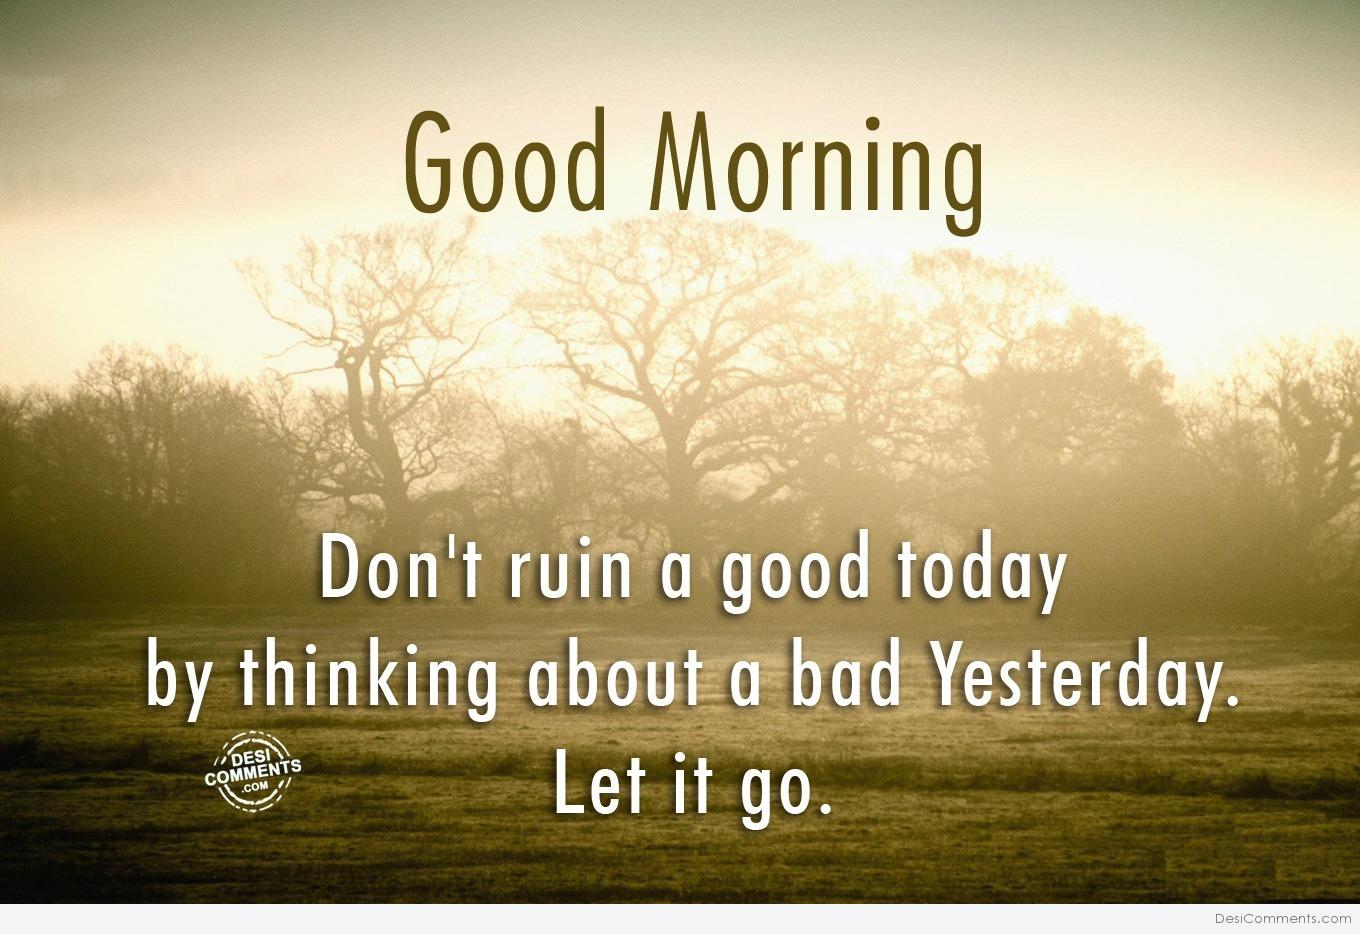 Don’t ruin a good today - DesiComments.com